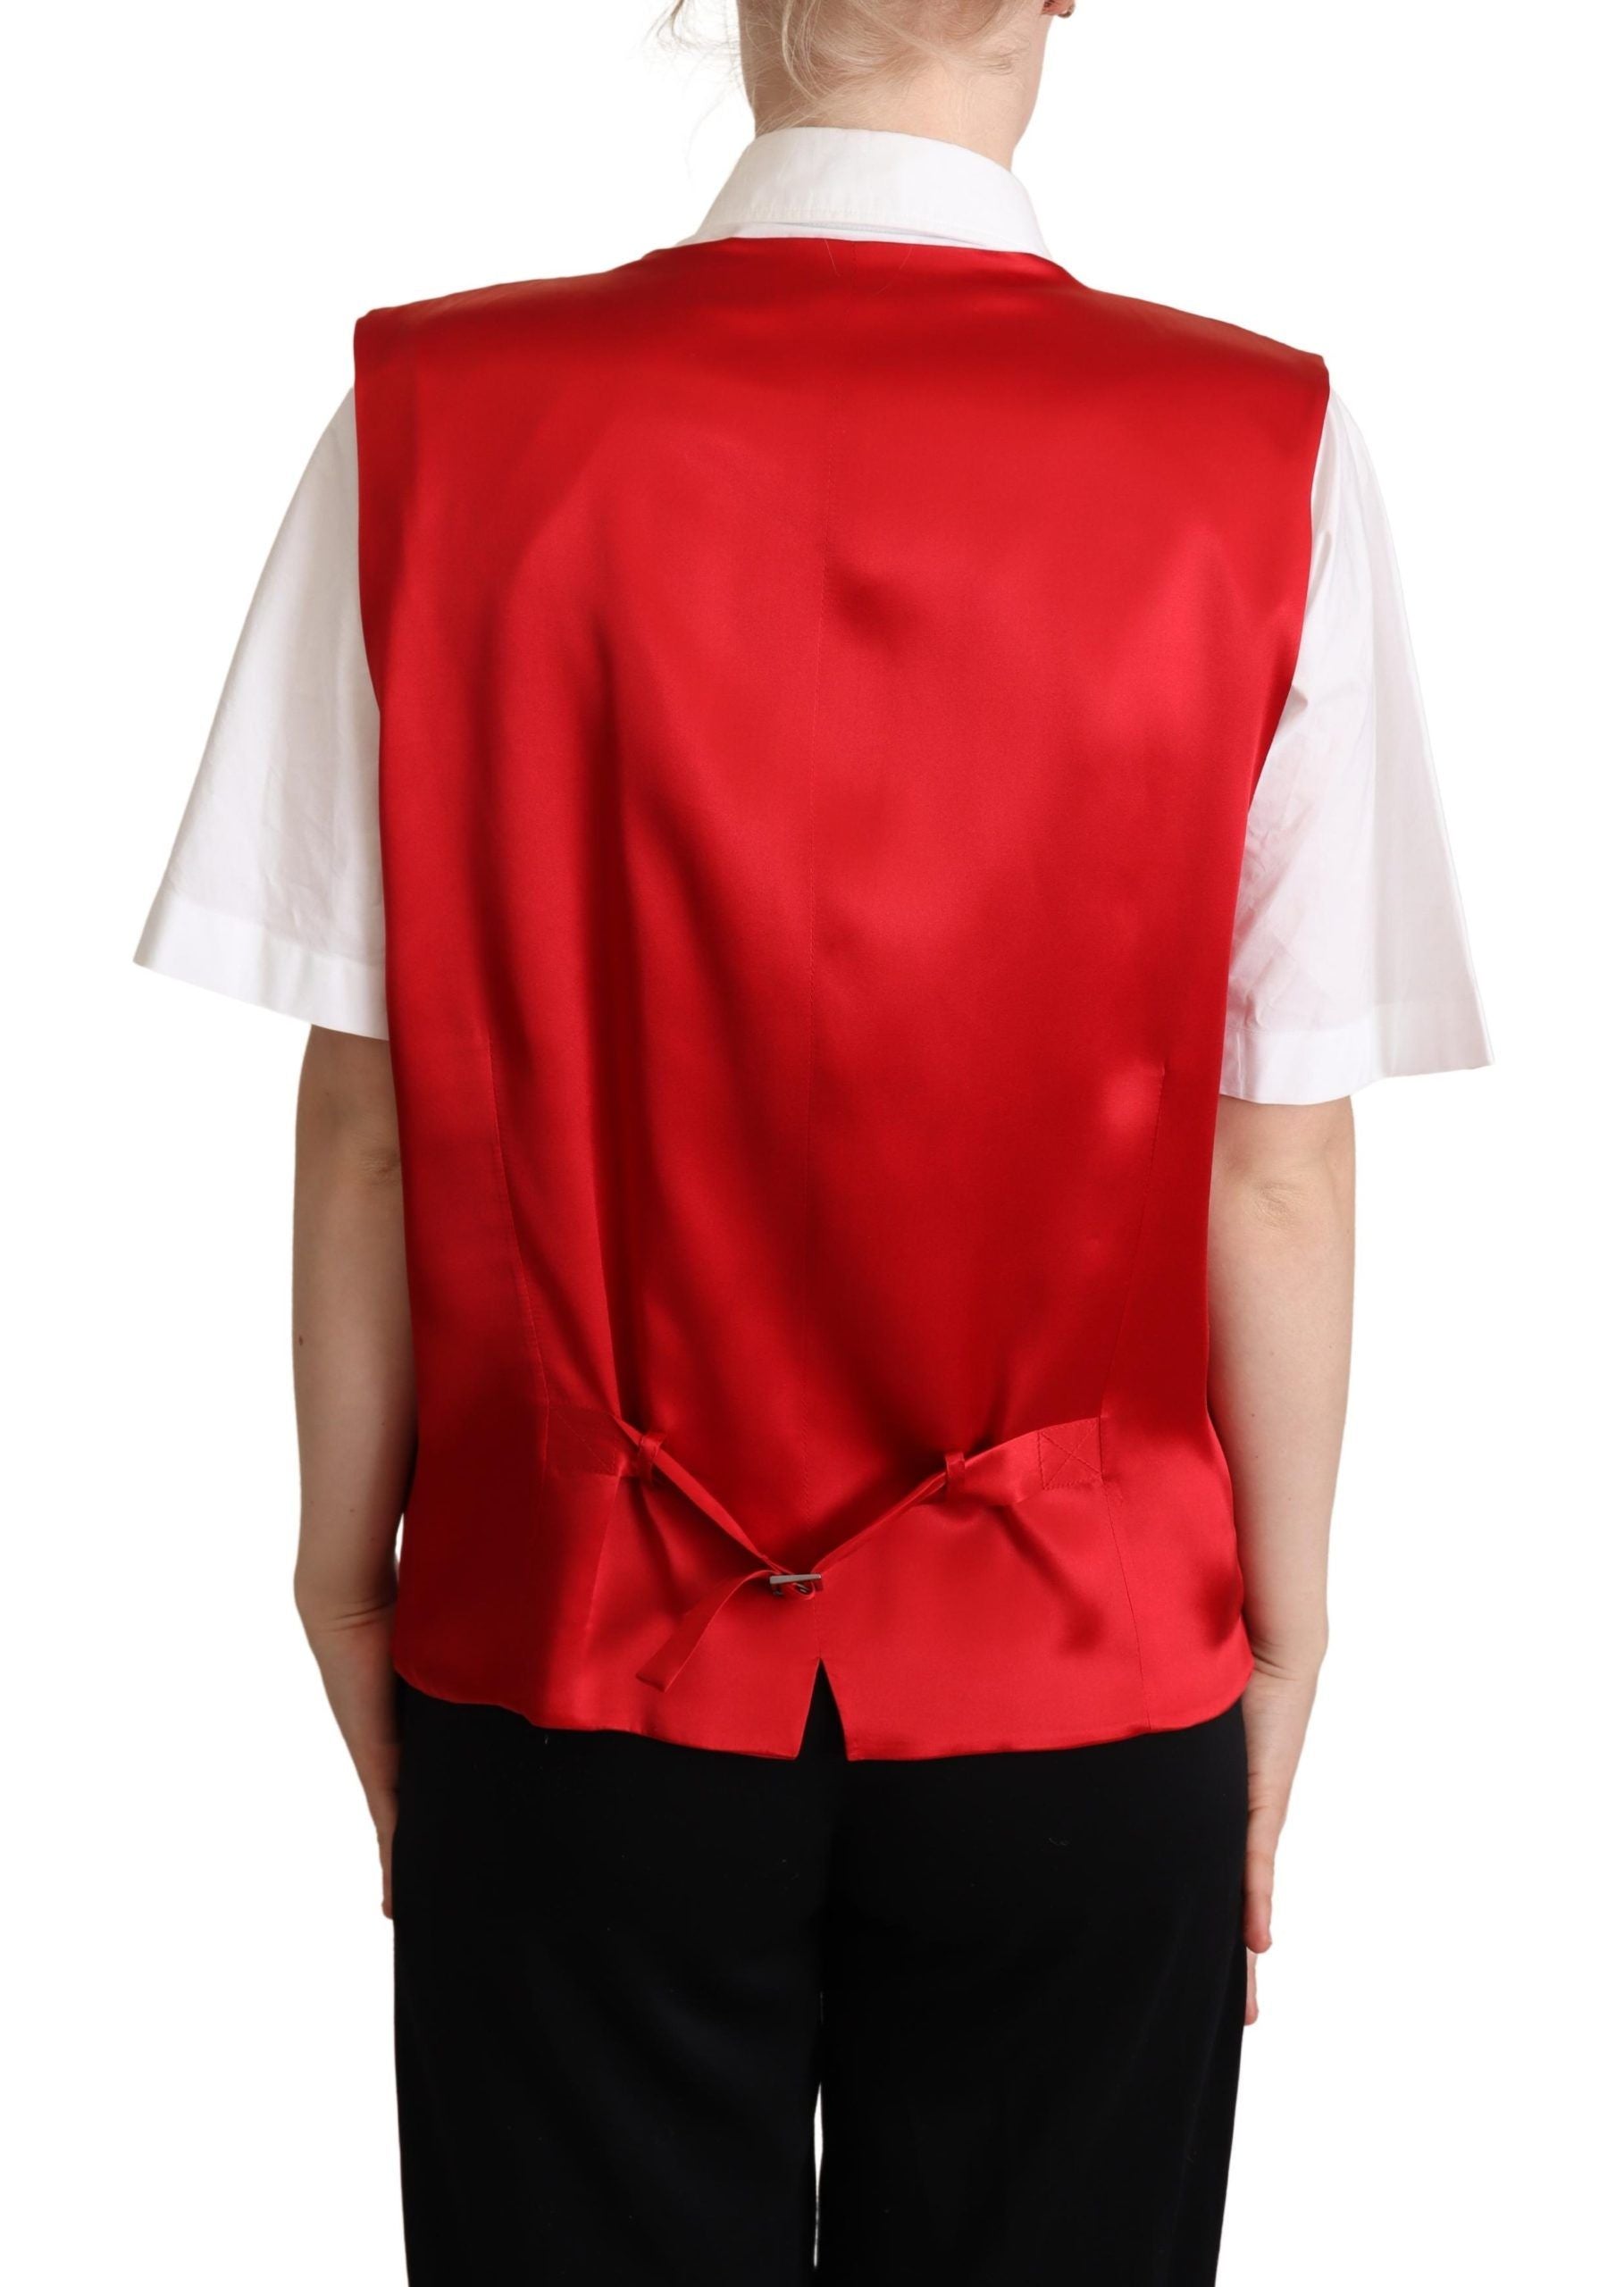 Dolce & Gabbana Red Virgin Wool Sleeveless Waistcoat Vest - Designed by Dolce & Gabbana Available to Buy at a Discounted Price on Moon Behind The Hill Online Designer Discount Store